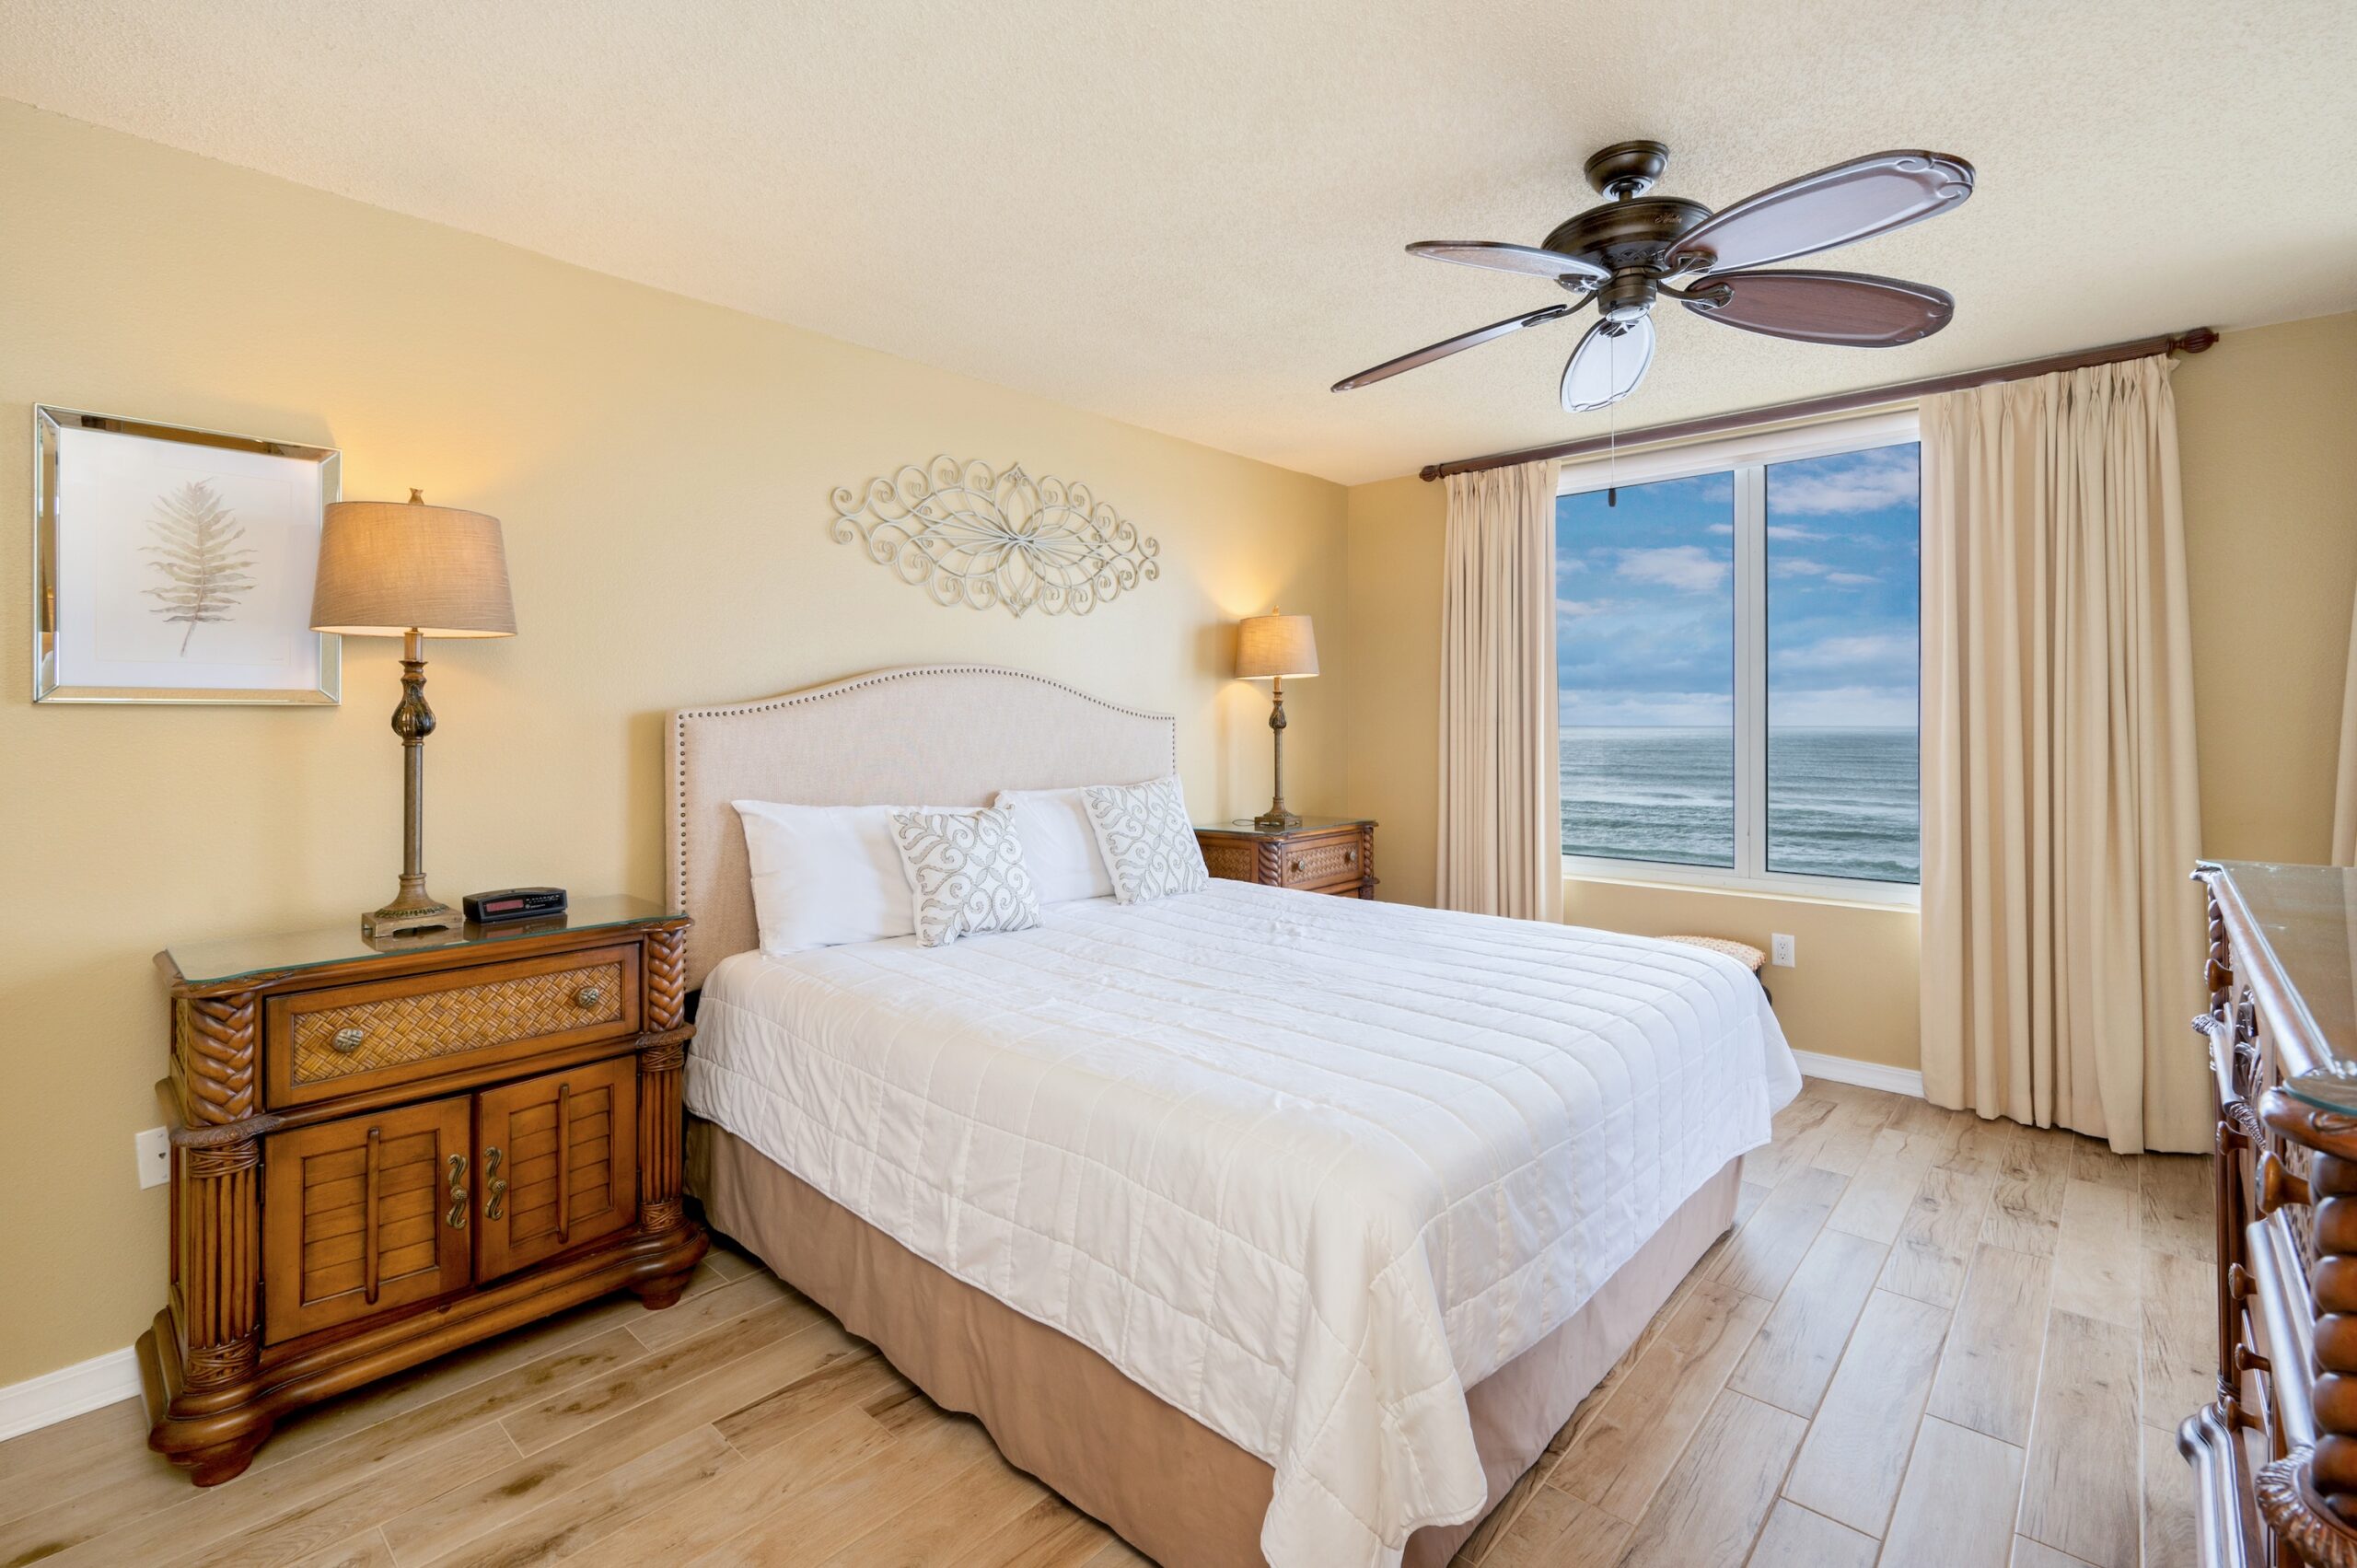 Master suite with a stunning ocean view